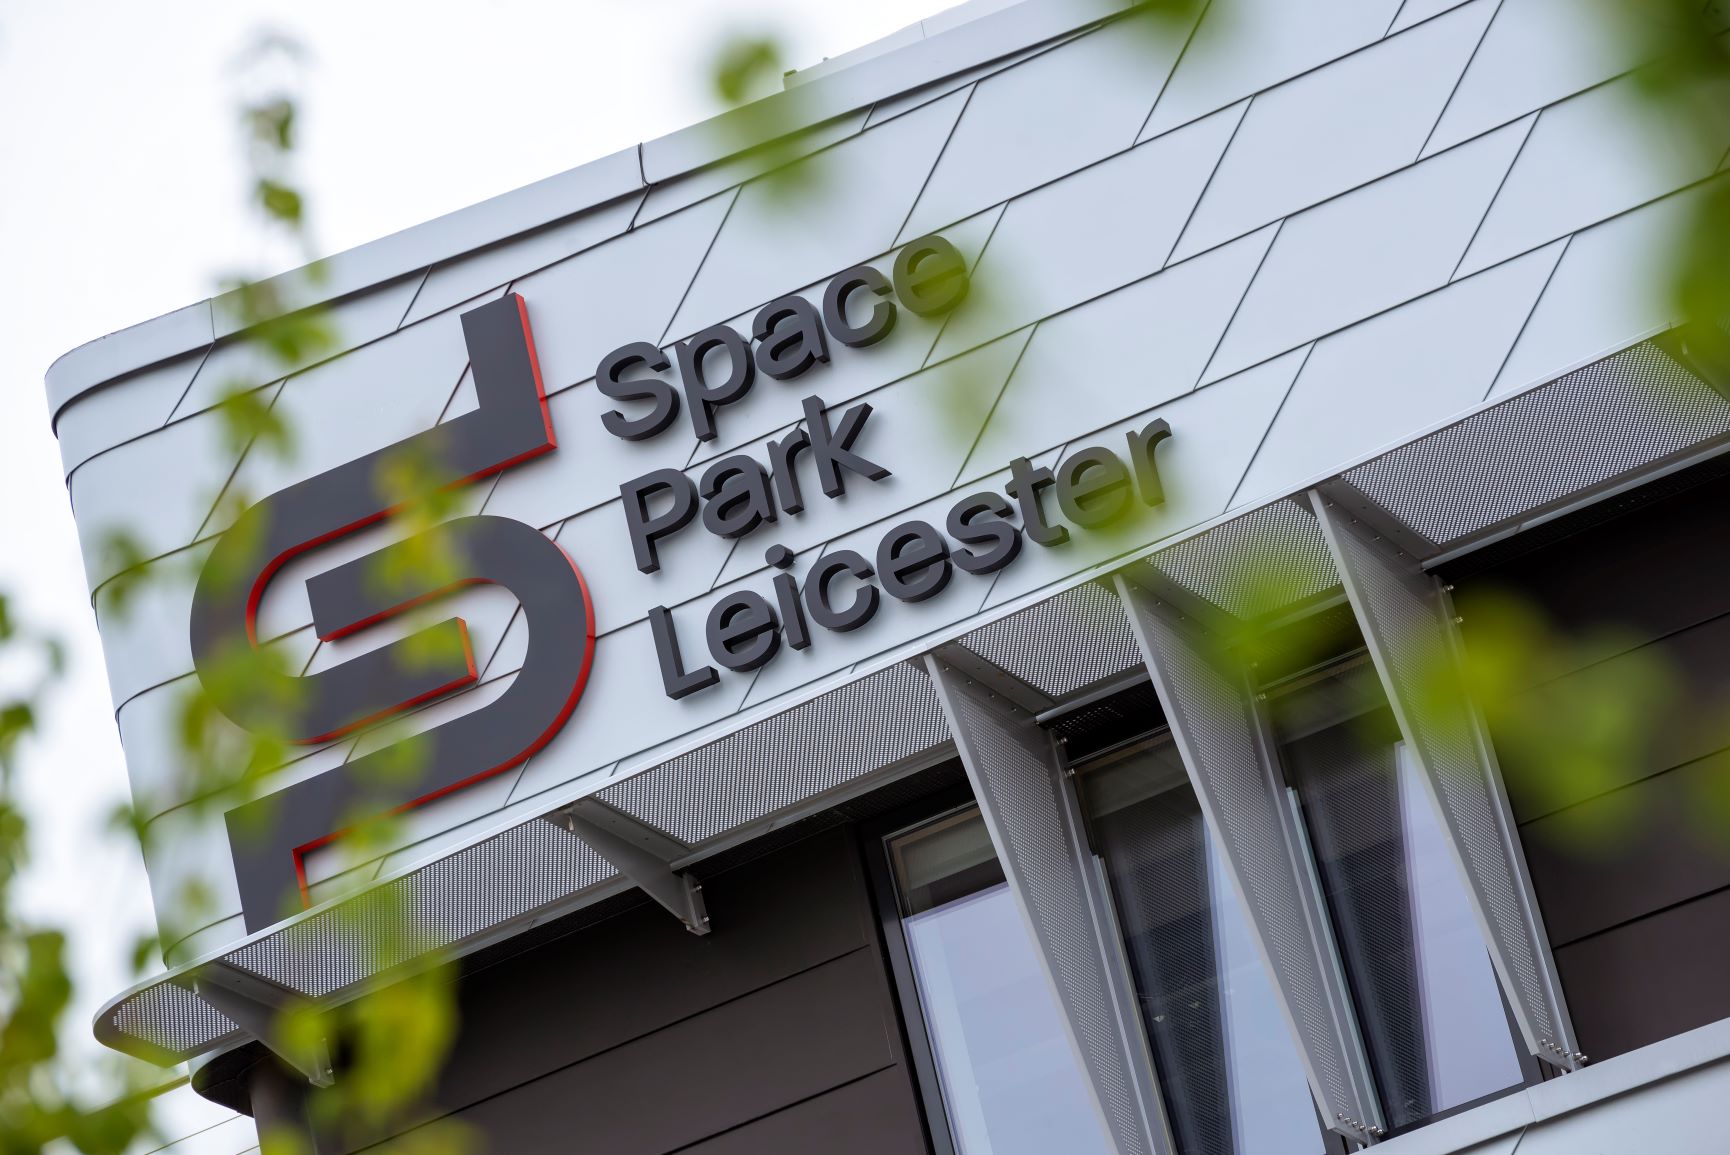 space park leicester